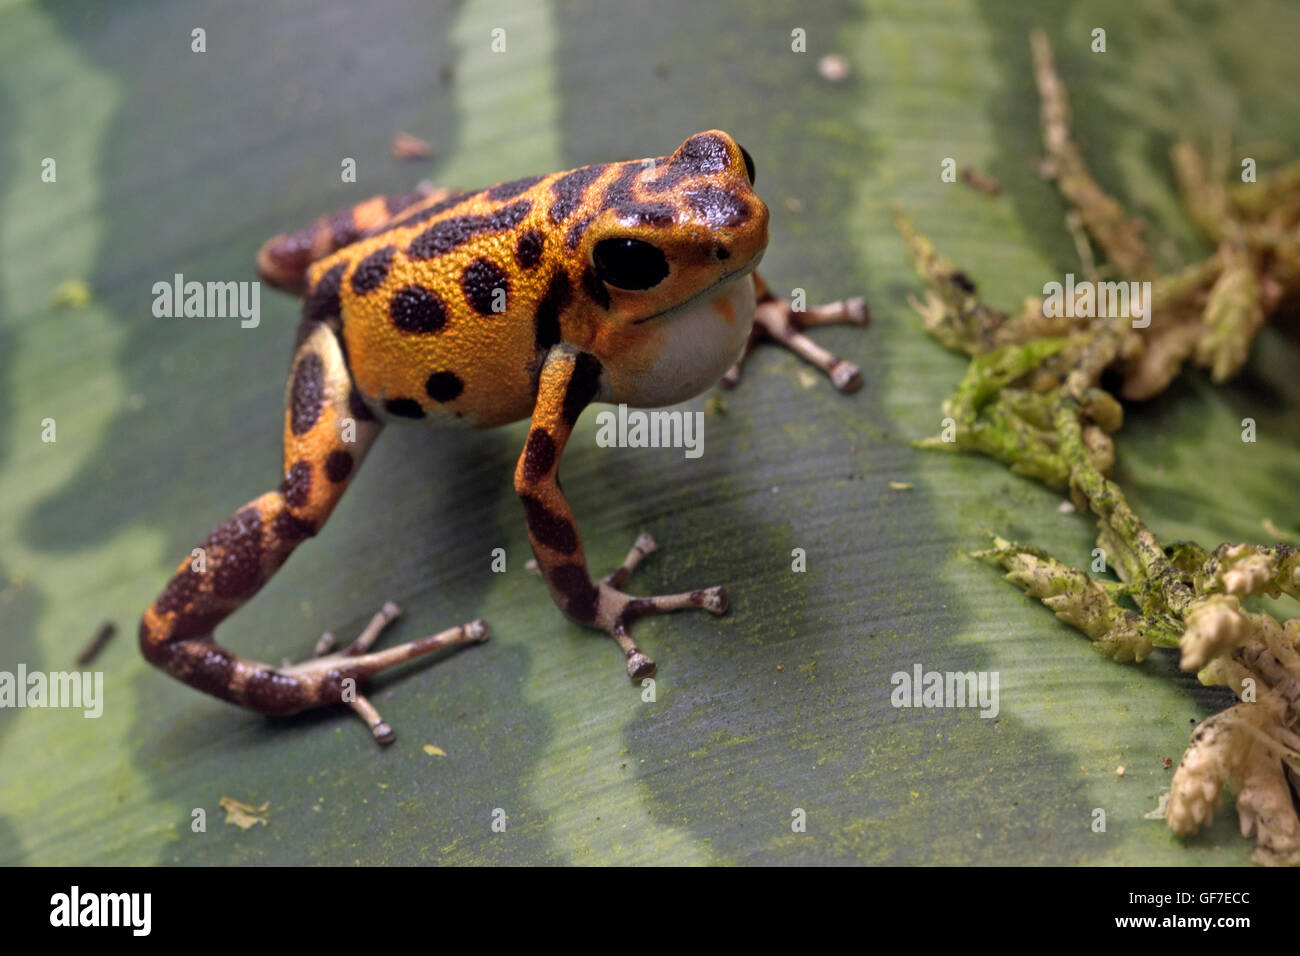 Red spotted poison-dart frog (Oophaga pumilio) Stock Photo